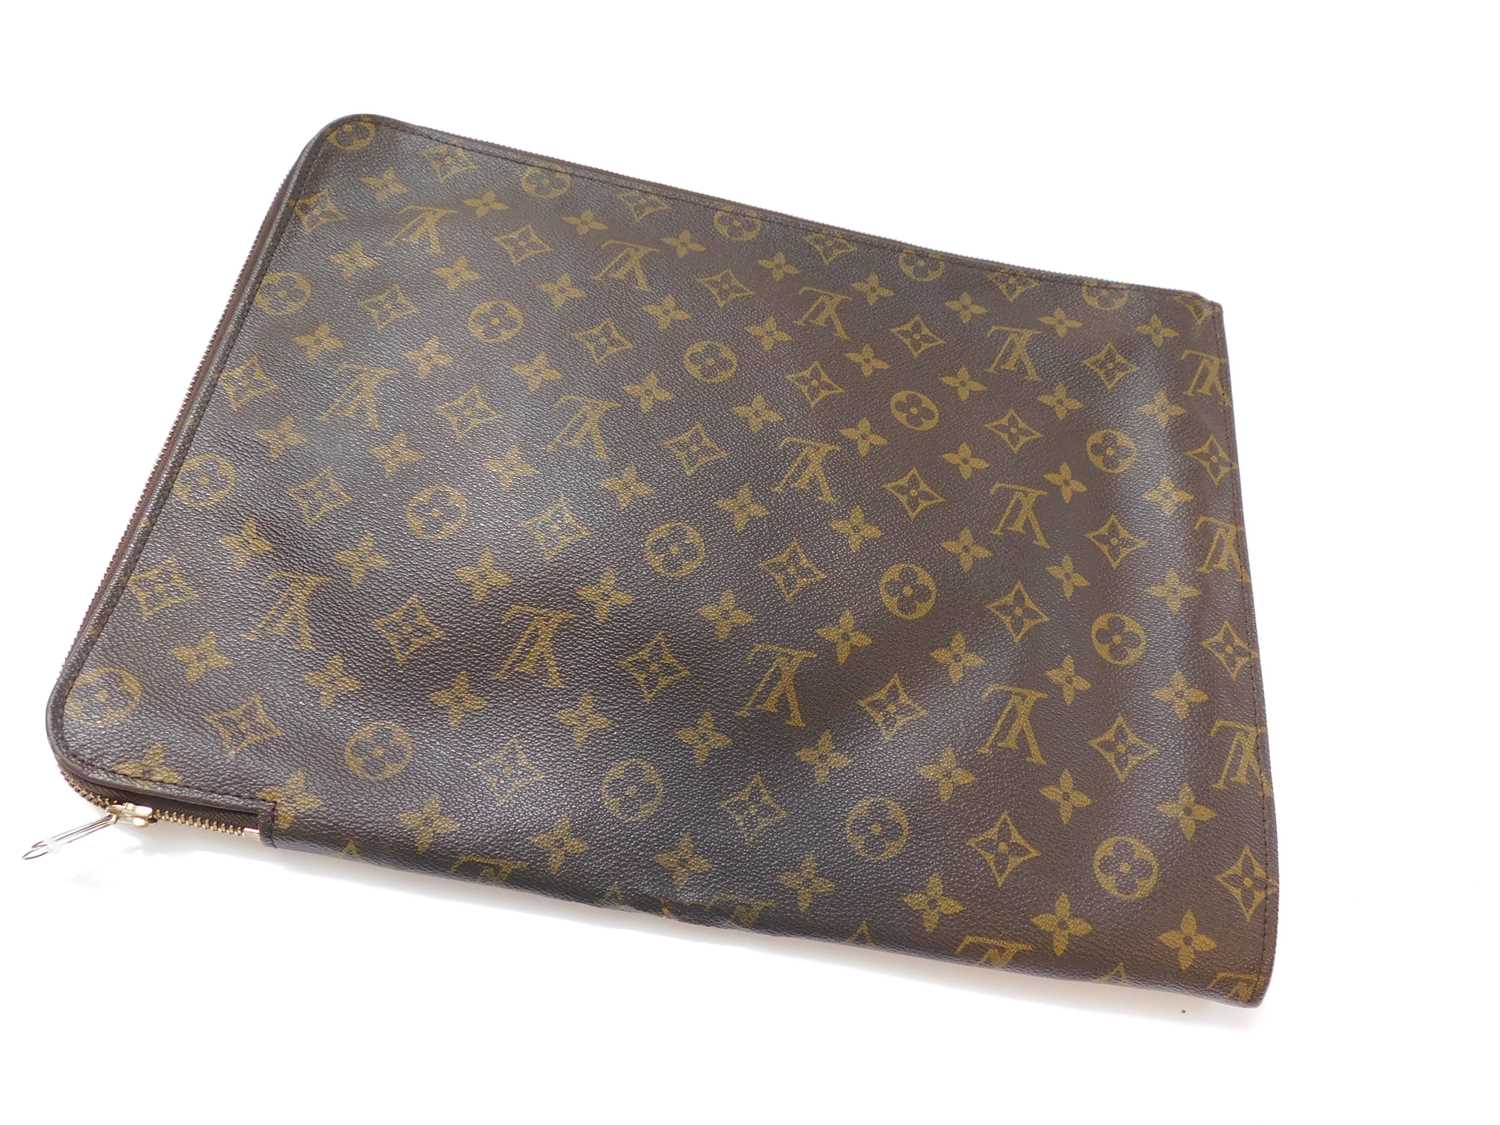 A Louis Vuitton travel sleeve / laptop case for The Concours D'Elegance, Stowe, July 28th 1990, - Image 4 of 4